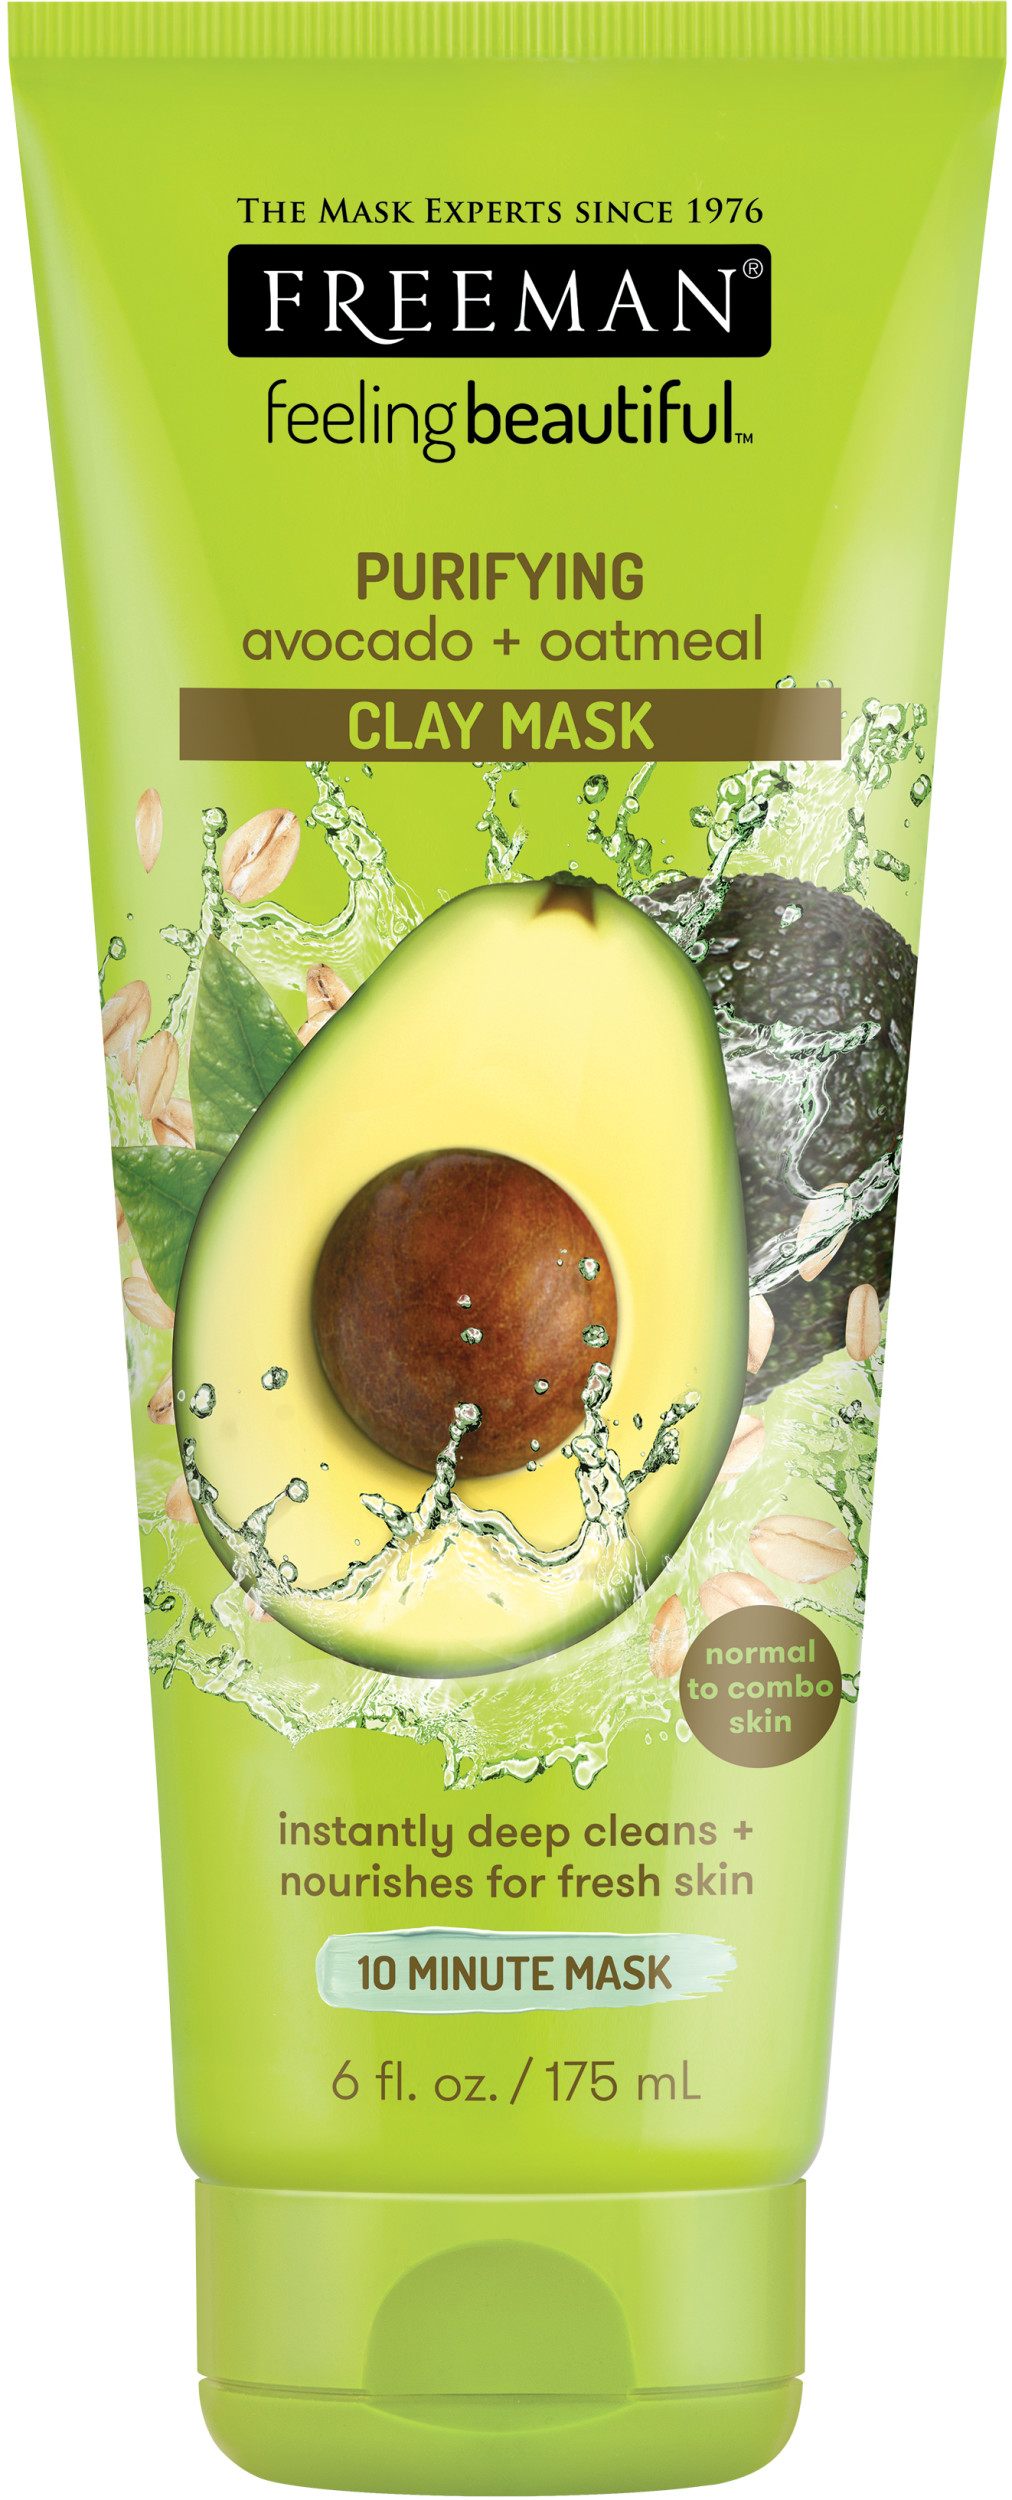 Freeman Purifying Avocado & Oatmeal Clay Facial Mask, Face Mask Instantly Deep Cleans, Creates Fresh Skin With Vitamin E, Perfect For Normal To Combination Skin, 6 fl.oz./175 mL Tube - image 1 of 5